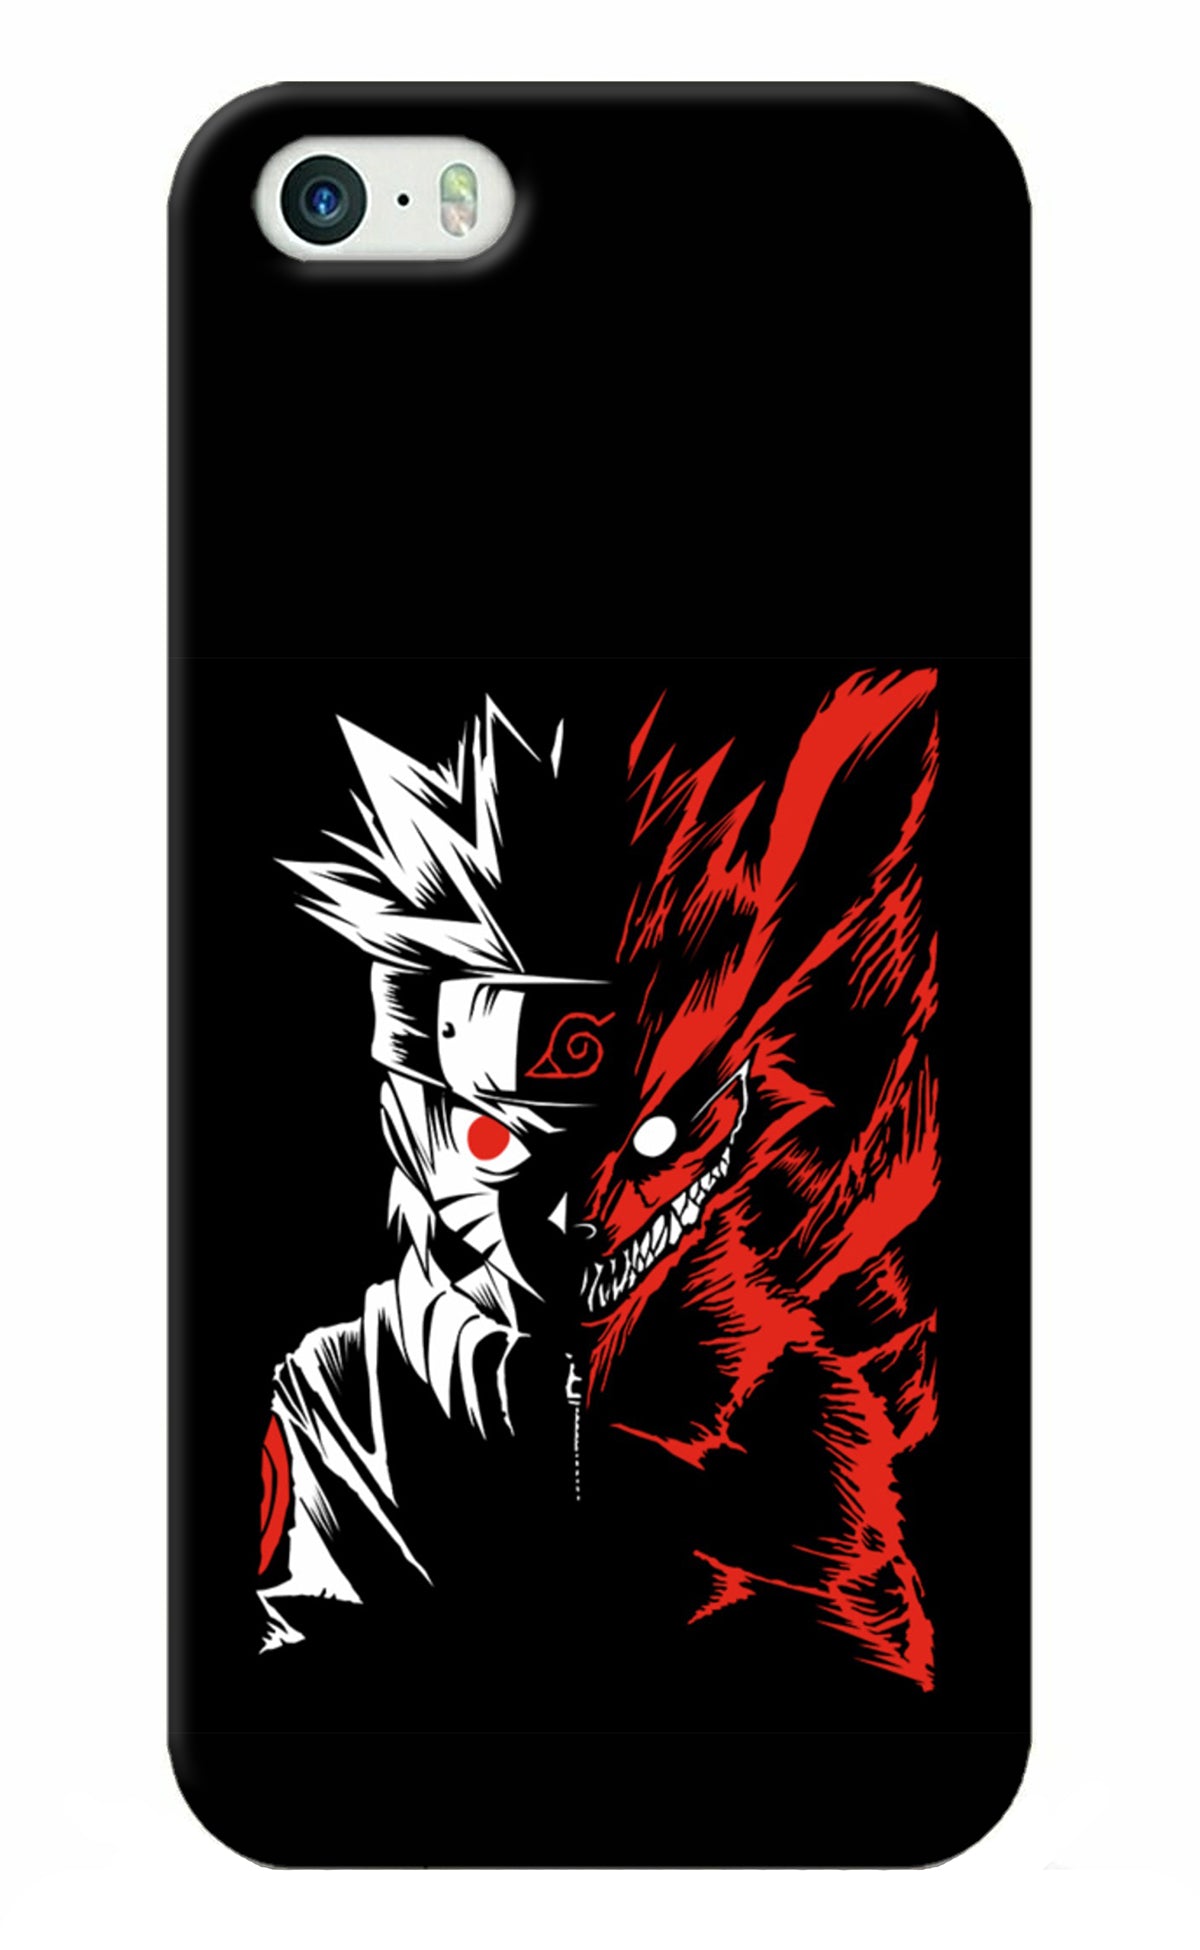 Naruto Two Face iPhone 5/5s Back Cover